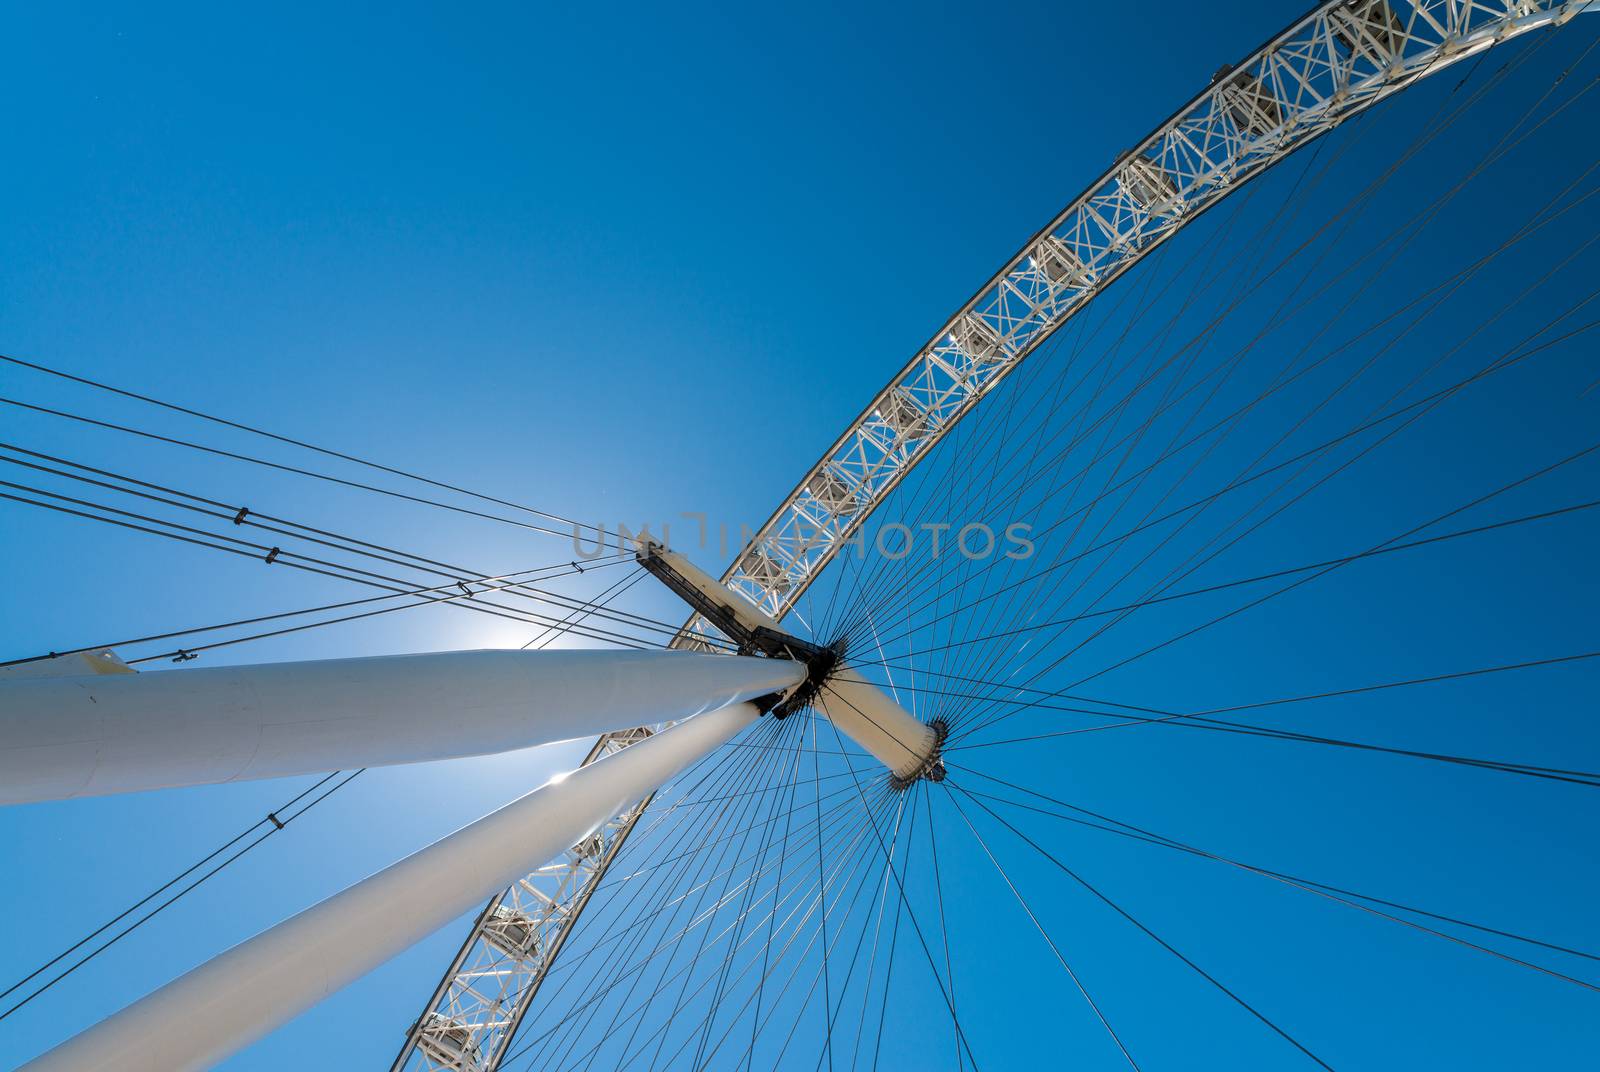 The London Eye wheel on the River Thames South Bank, London, Uni by jovannig